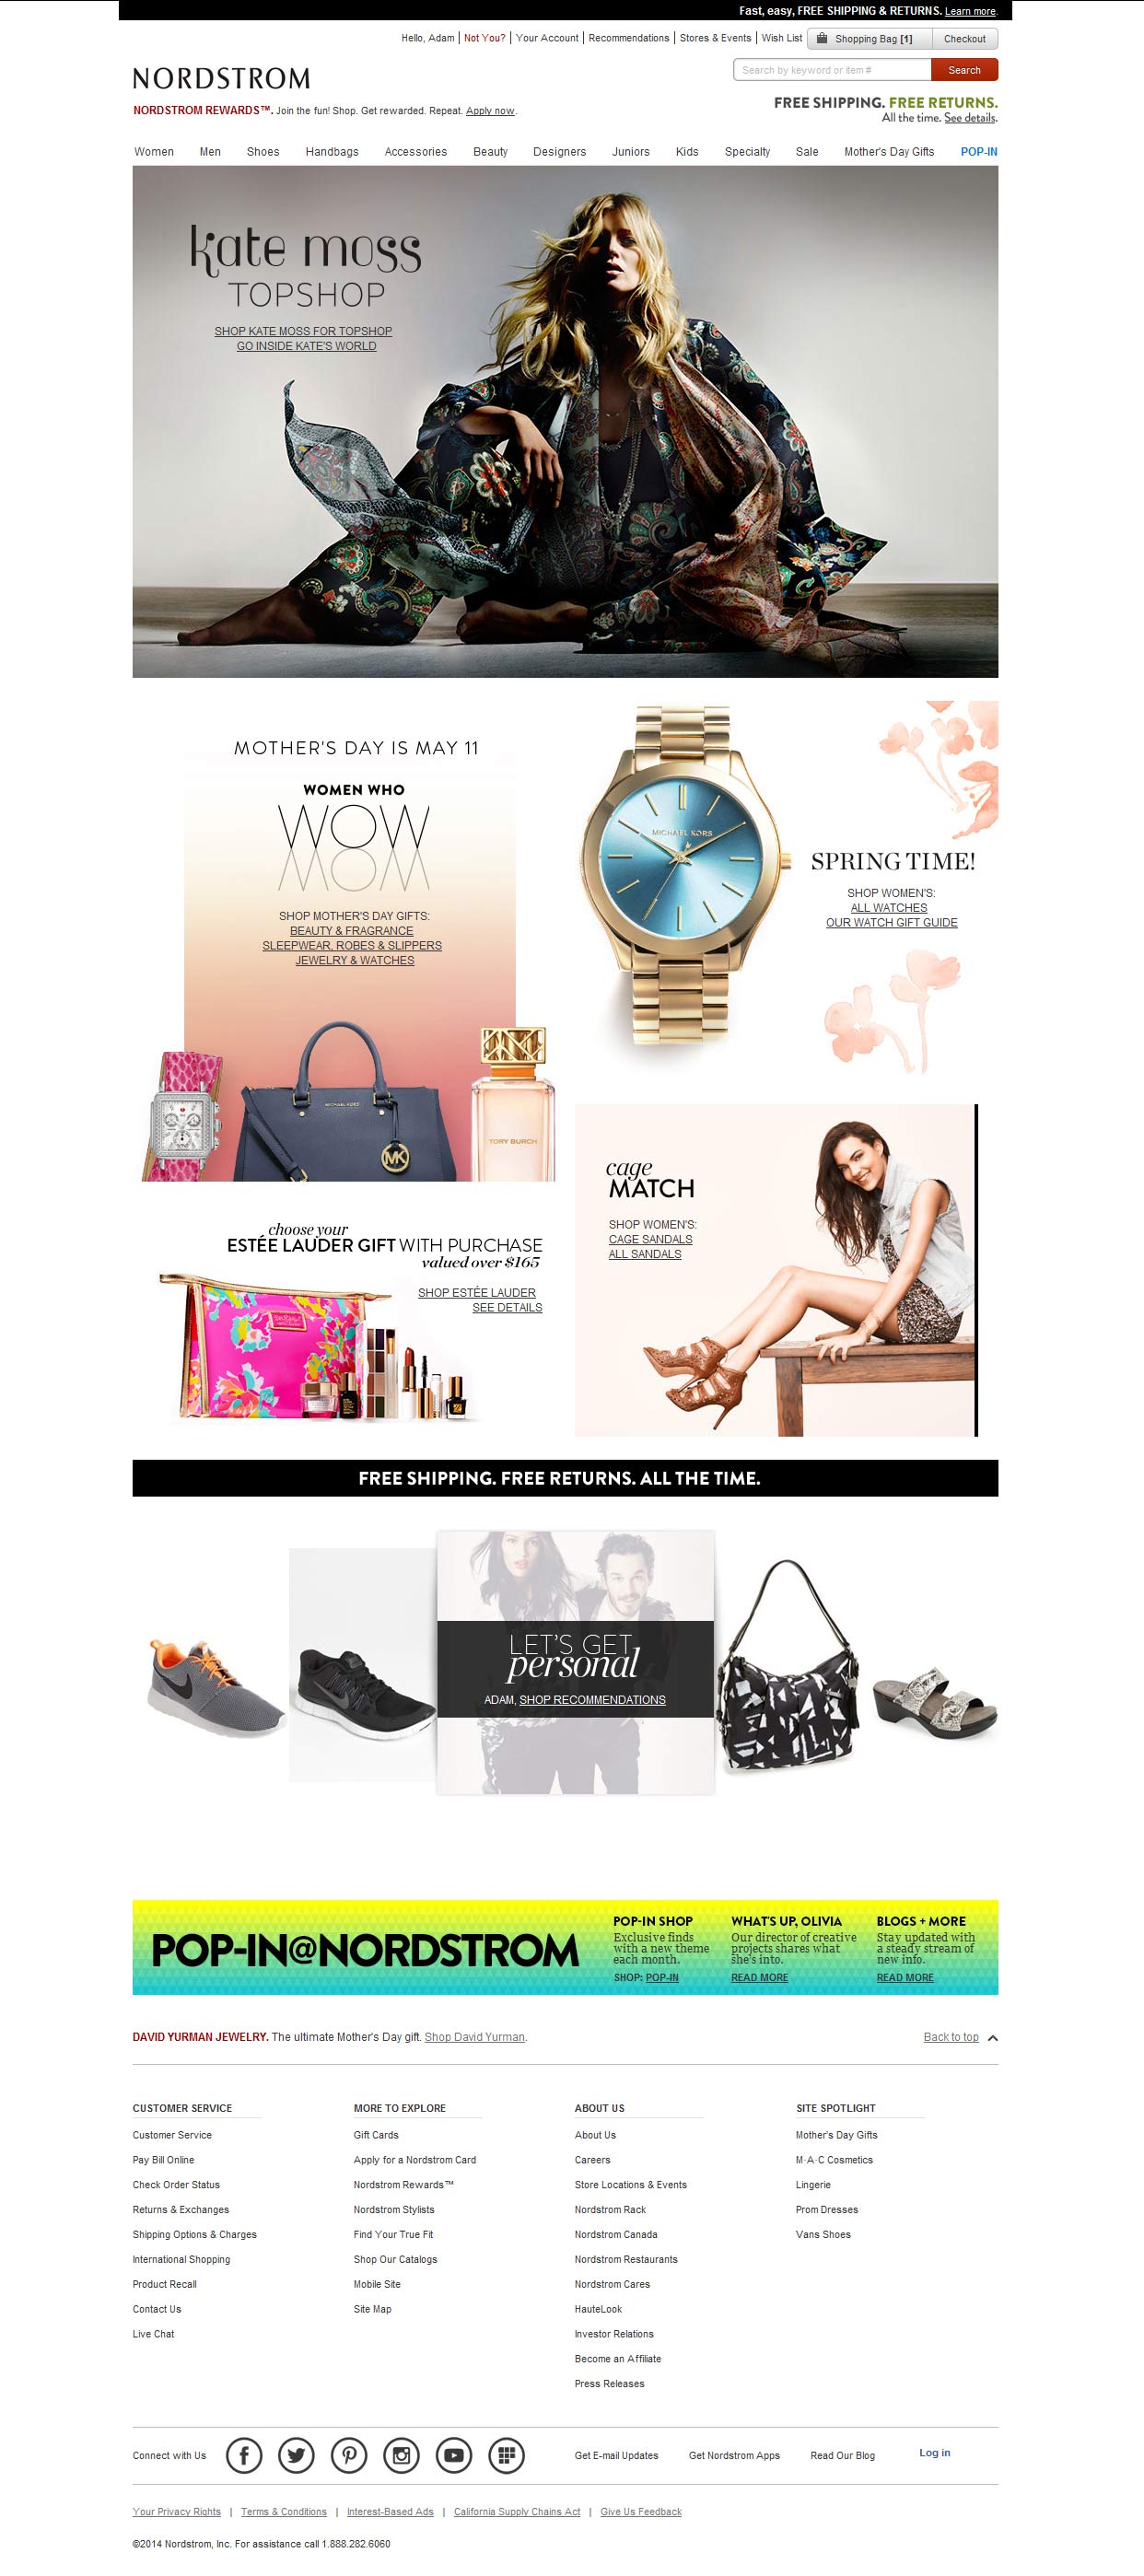 nordstrom website as of May 2014